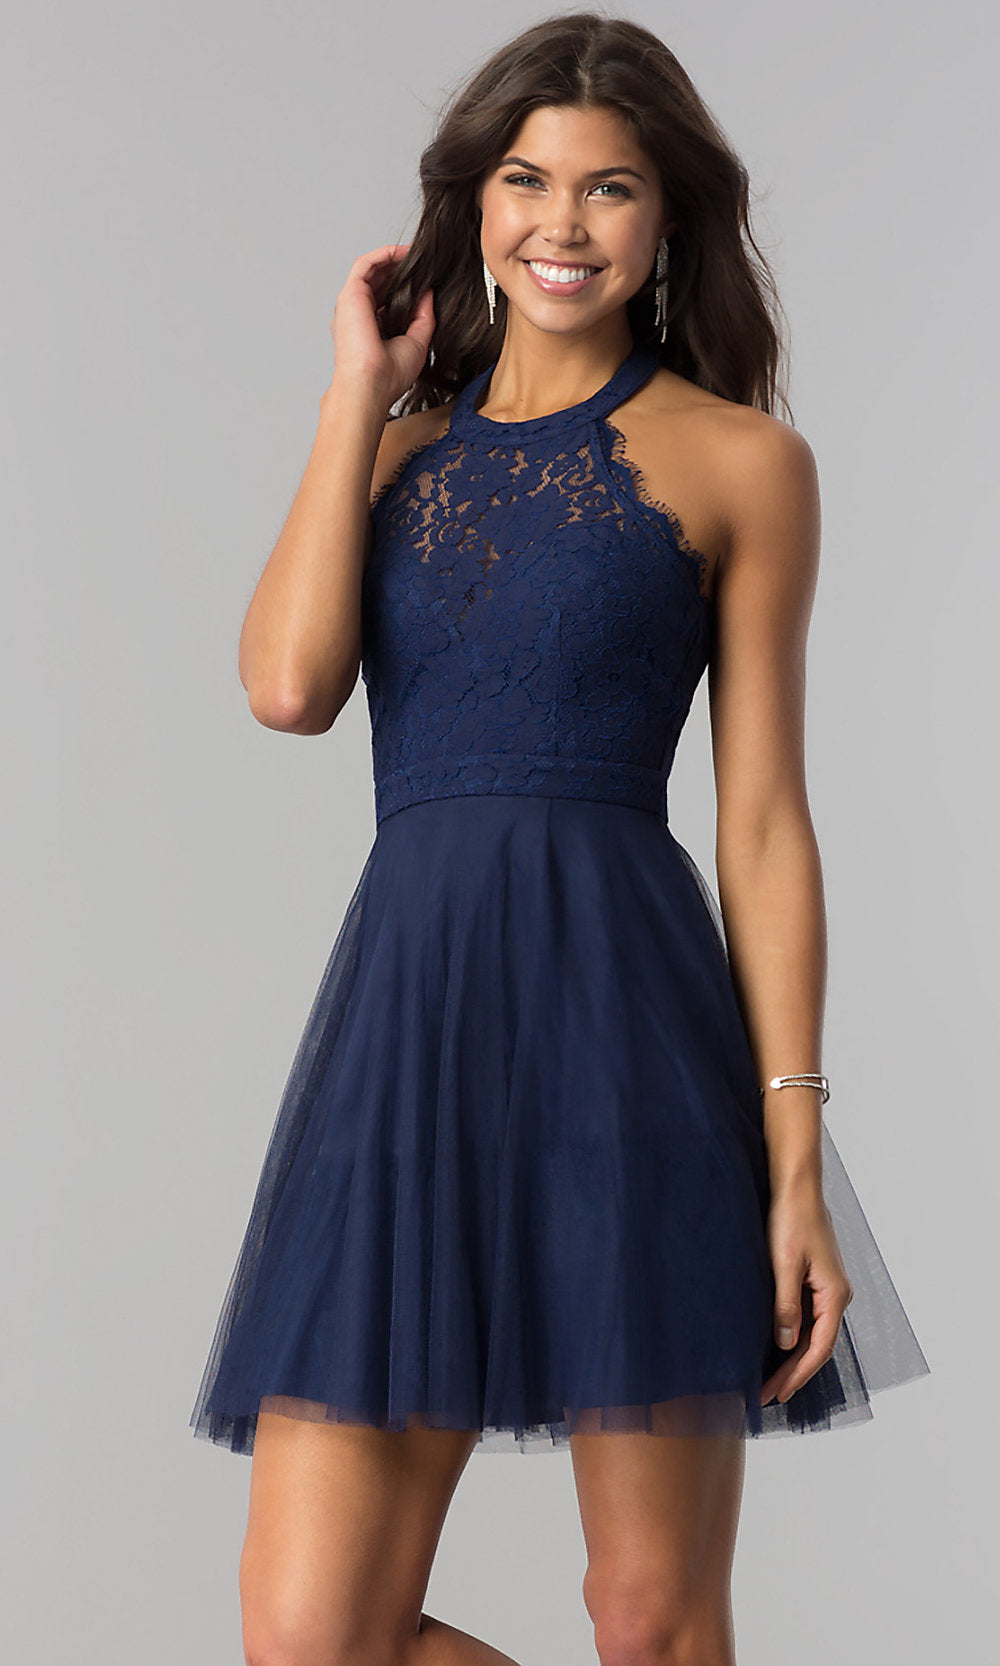 Navy Lace-Bodice Homecoming Short Halter Party Dress